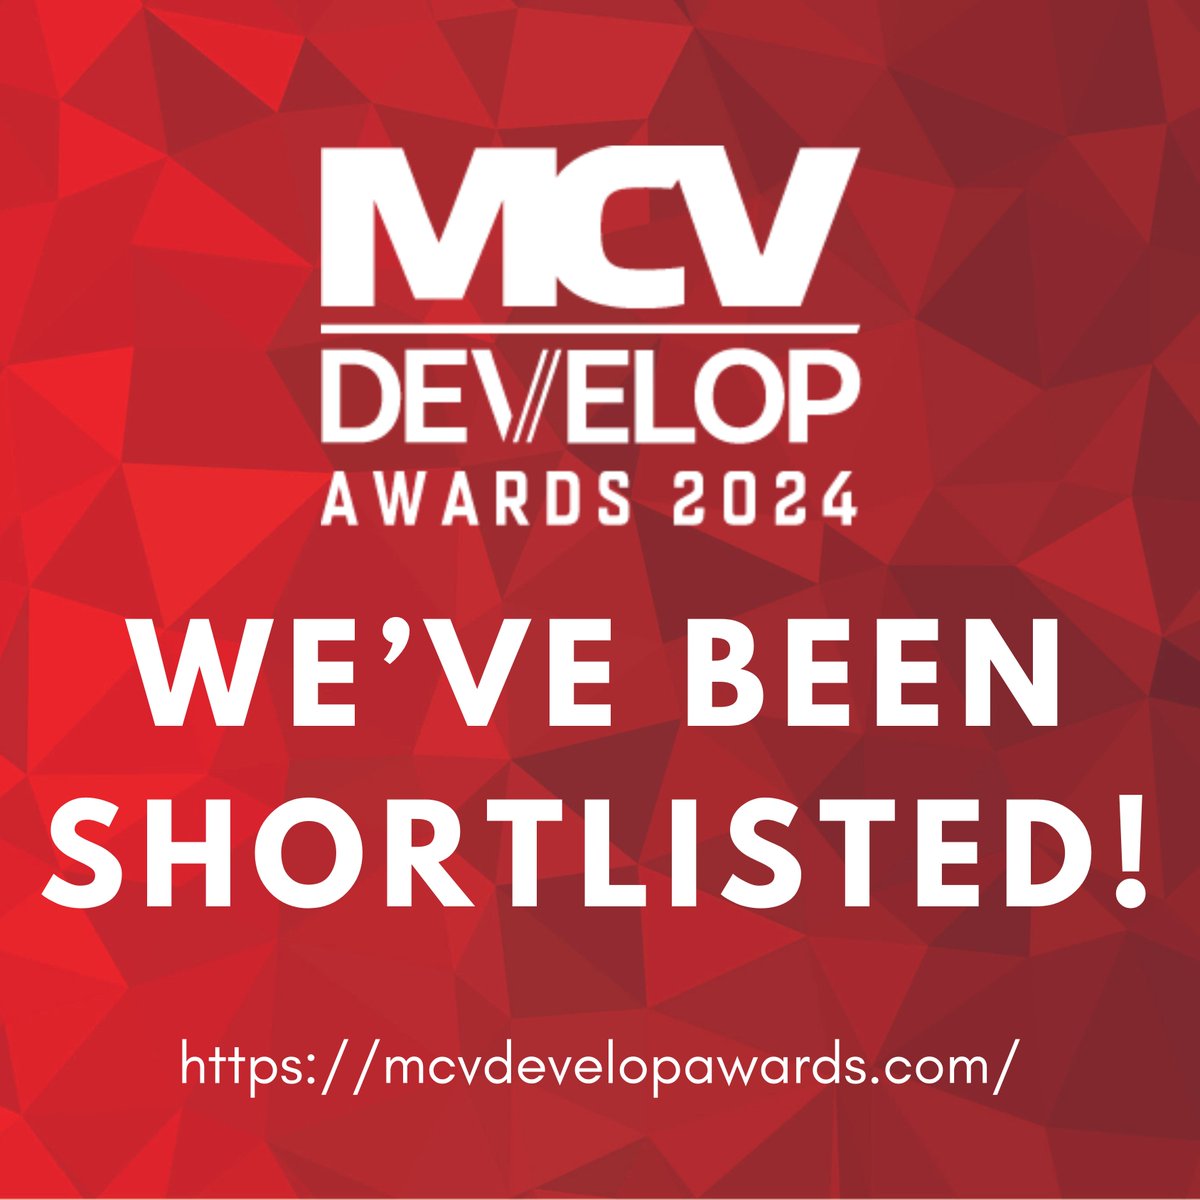 We proudly announce that Slitherine has been shortlisted for the third year in row at the MCV Develop Awards - Best Indie Publisher. The voting for the MCV awards is open so, to all our games industry friends, you can show your support here: mcvdevelopawards.com/vote/?cmid=69f…